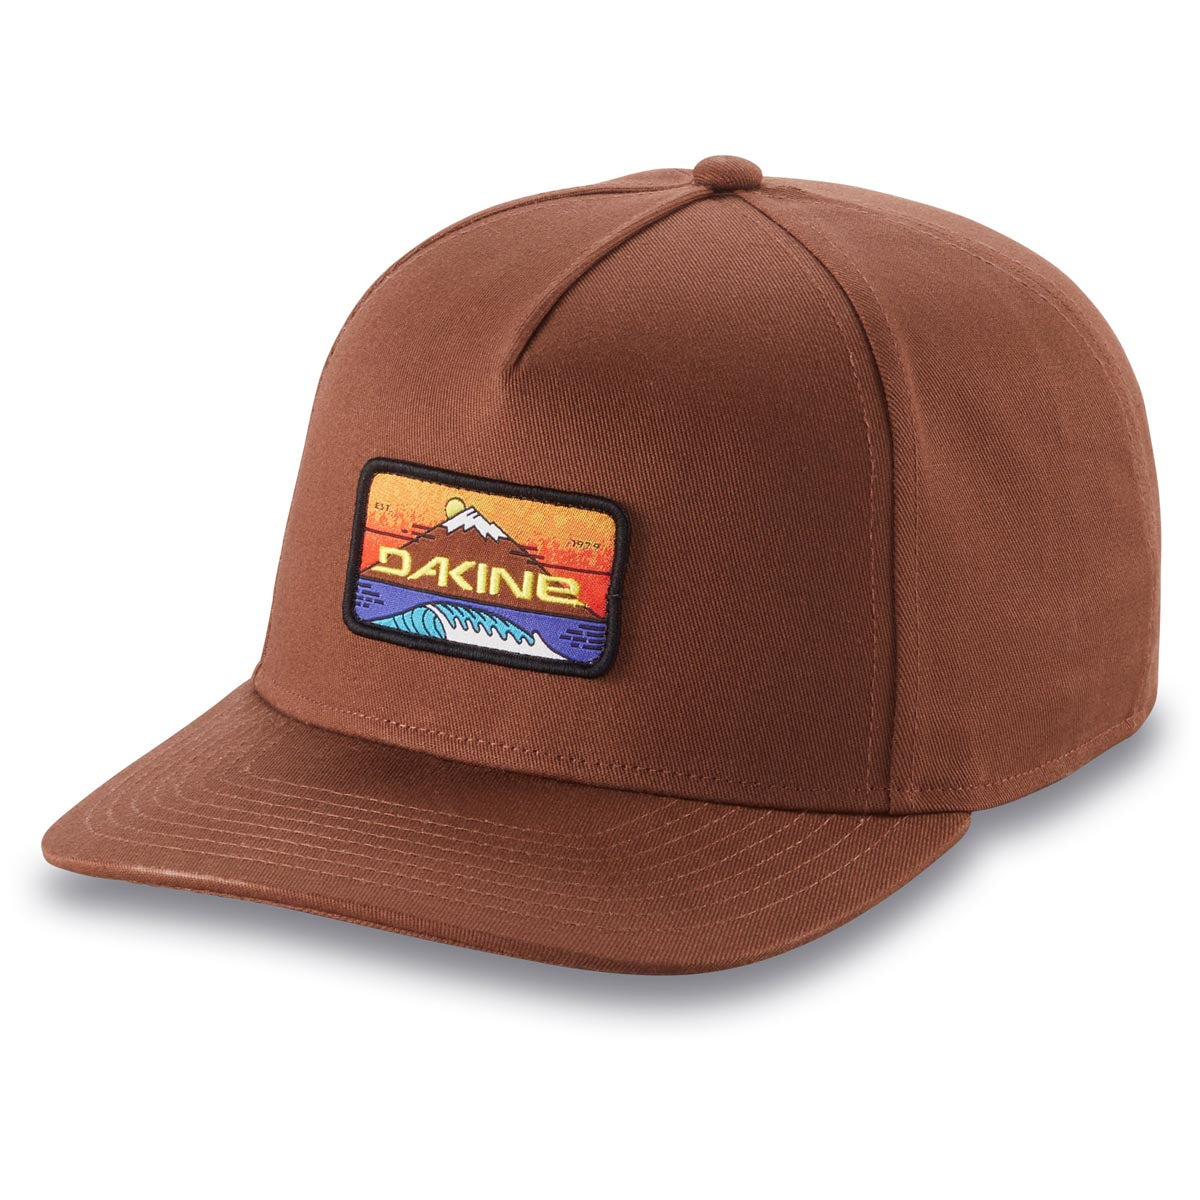 Dakine All Sports Patch Ball Hat - Cappuccino image 1